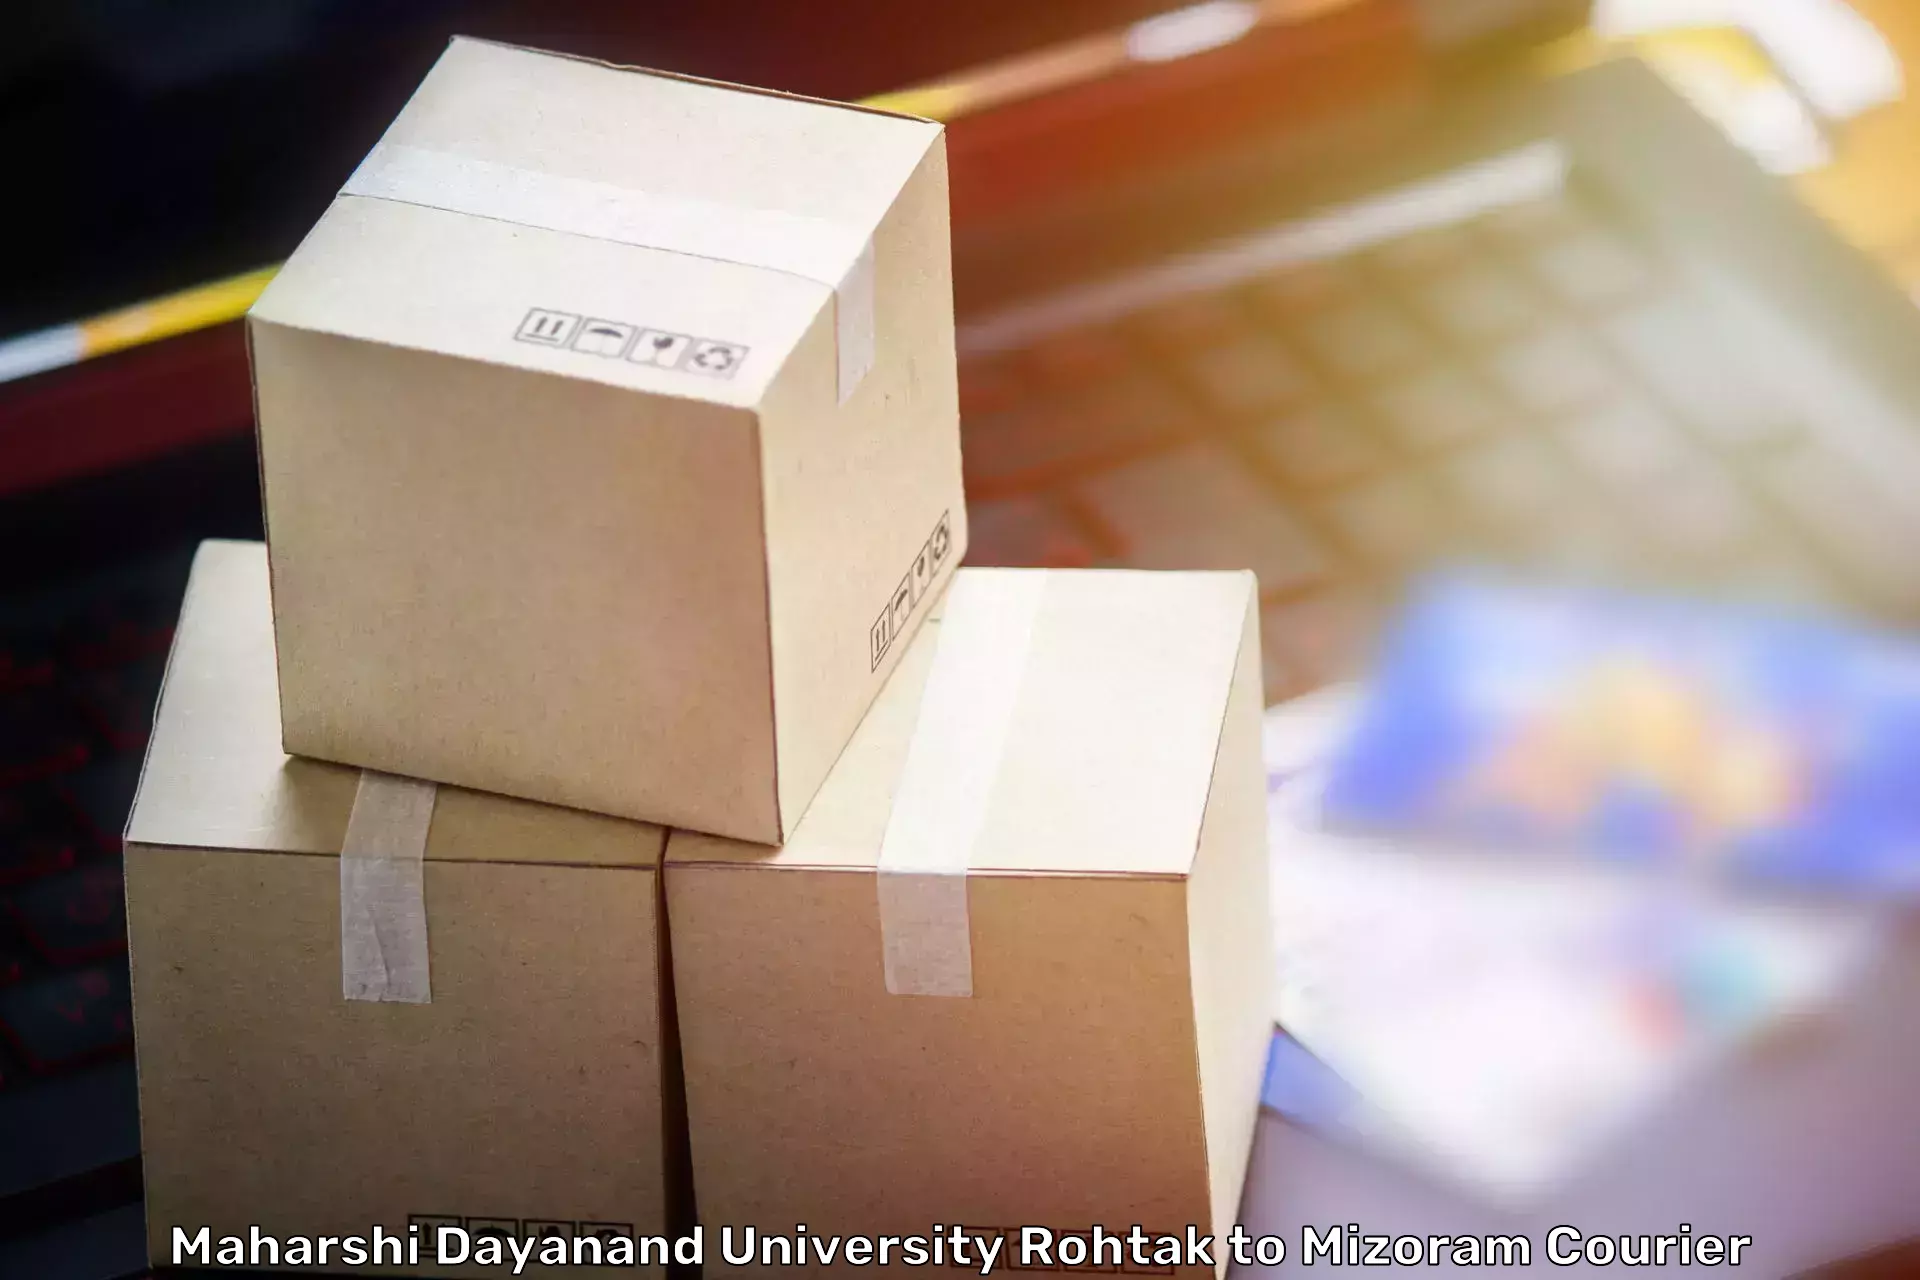 Professional movers and packers Maharshi Dayanand University Rohtak to Mizoram